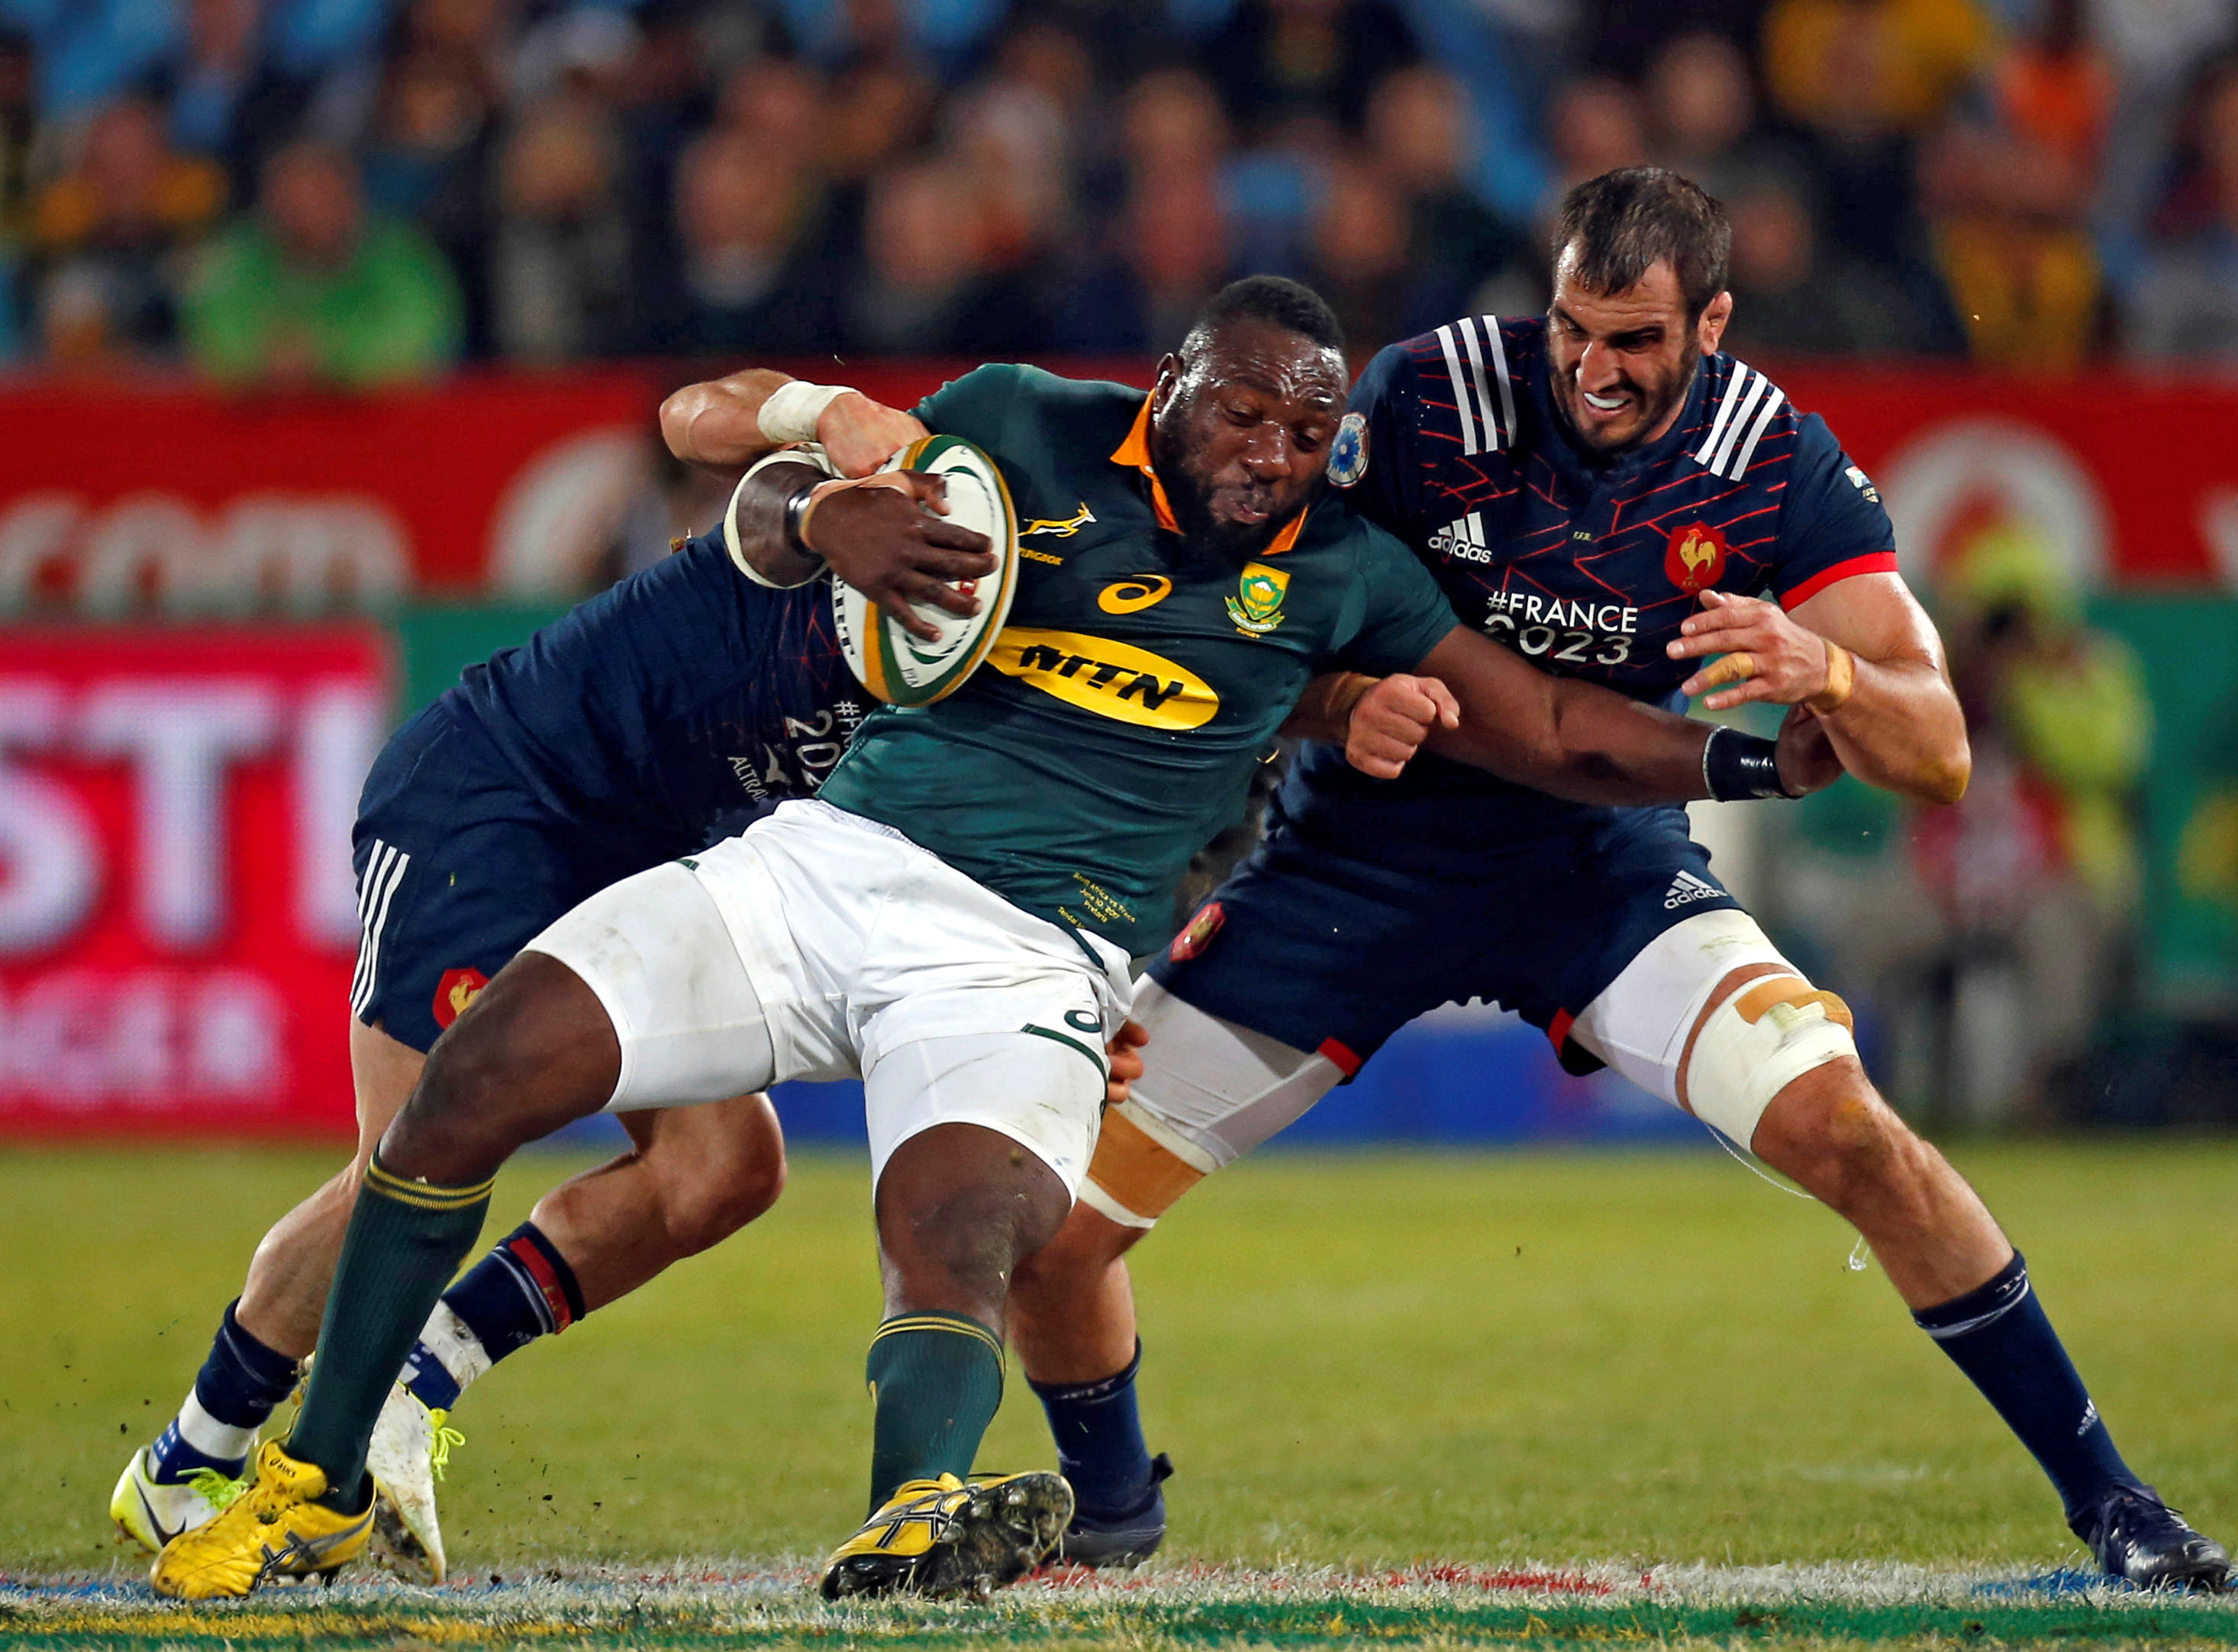 Rugby: Boks find form in four-try romp over under-strength France